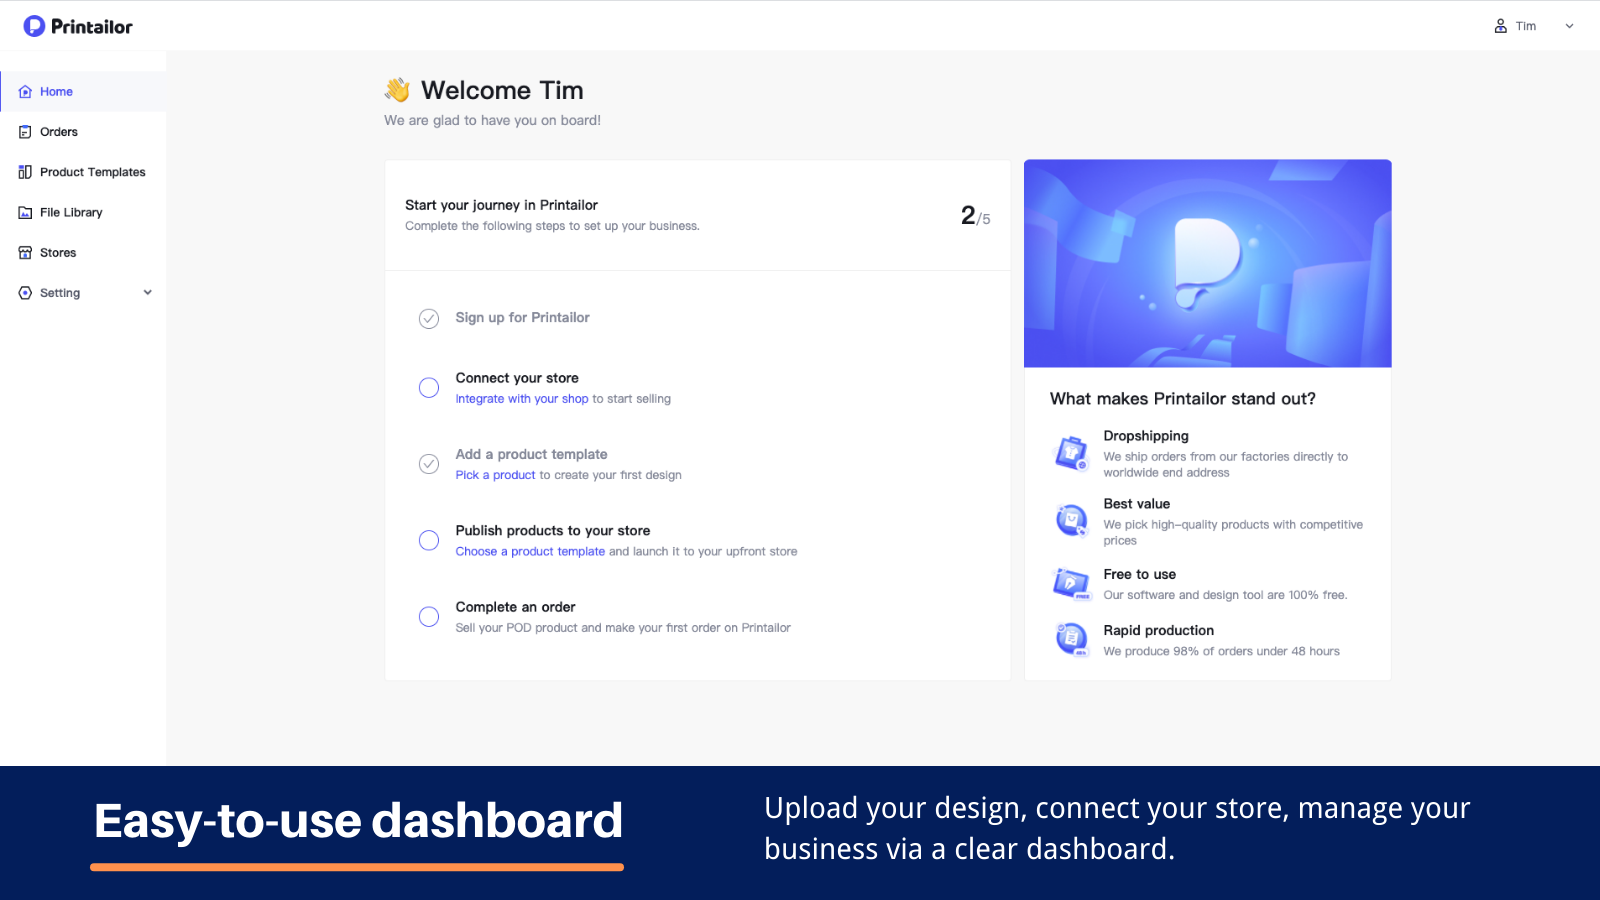 Printailor easy-to-use dashboard